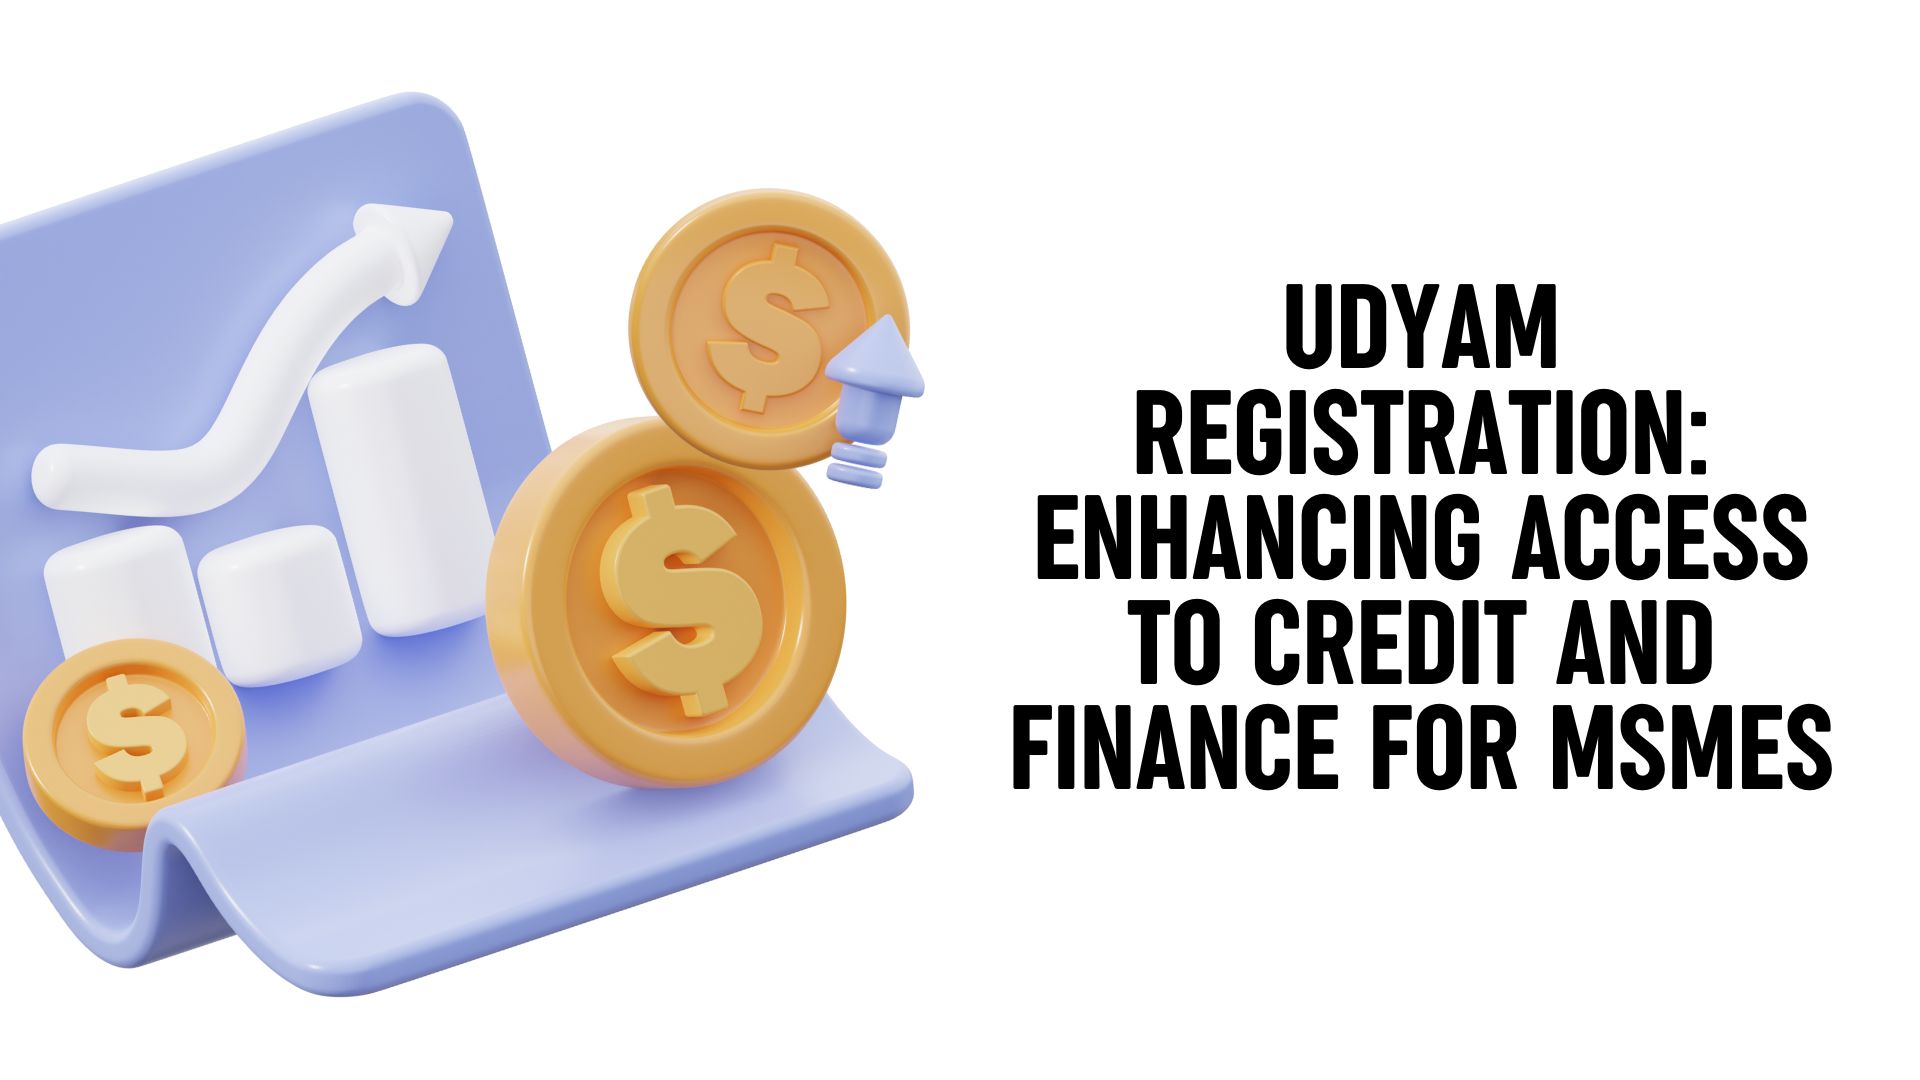 Udyam Registration Enhancing Access to Credit and Finance for MSMEs